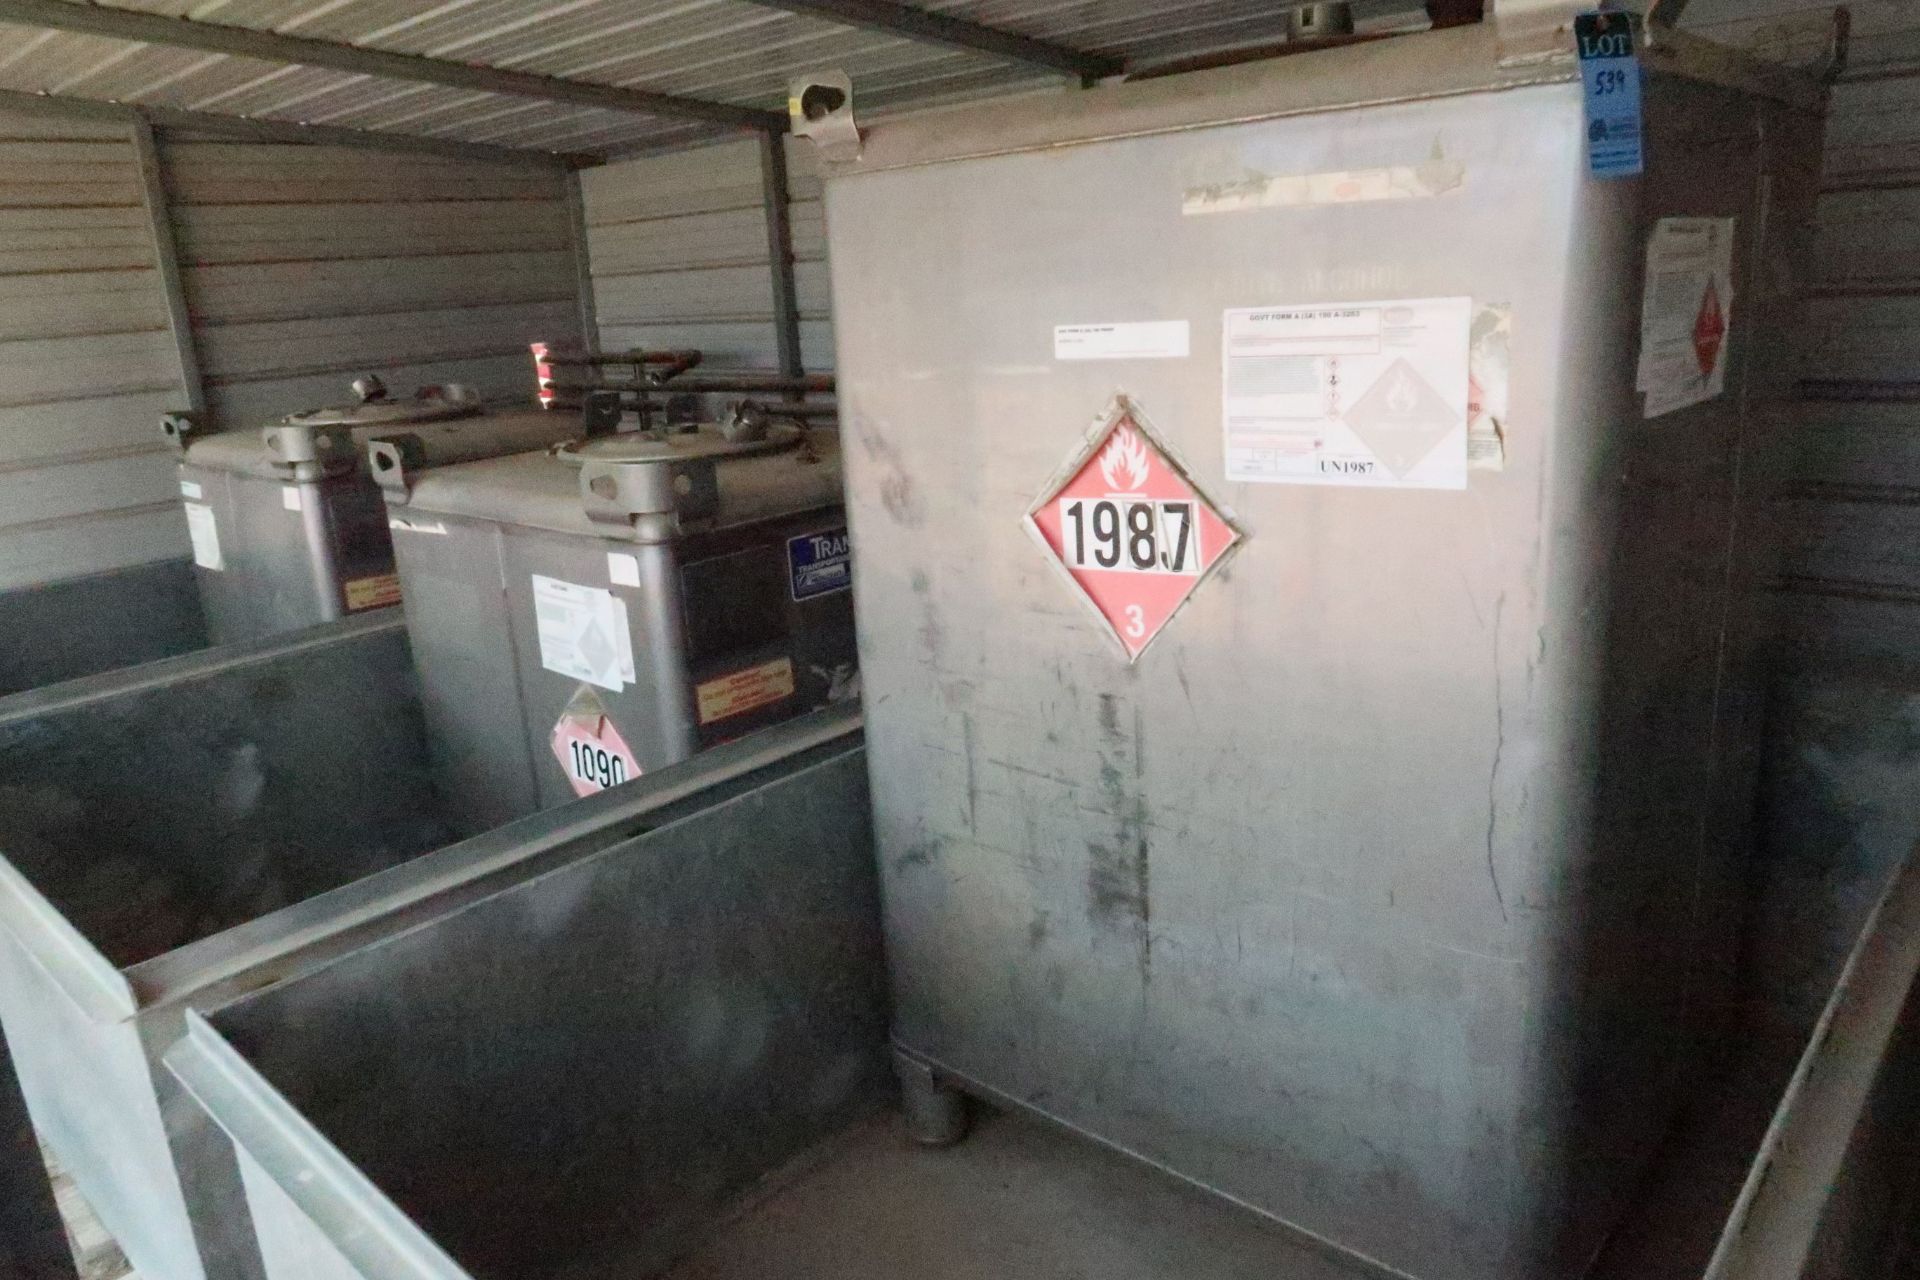 MISC. STAINLESS STEEL FLAMMABLE MATERIAL TANKS; (1) 549-GAL. UN1987 ALCOHOL TANK